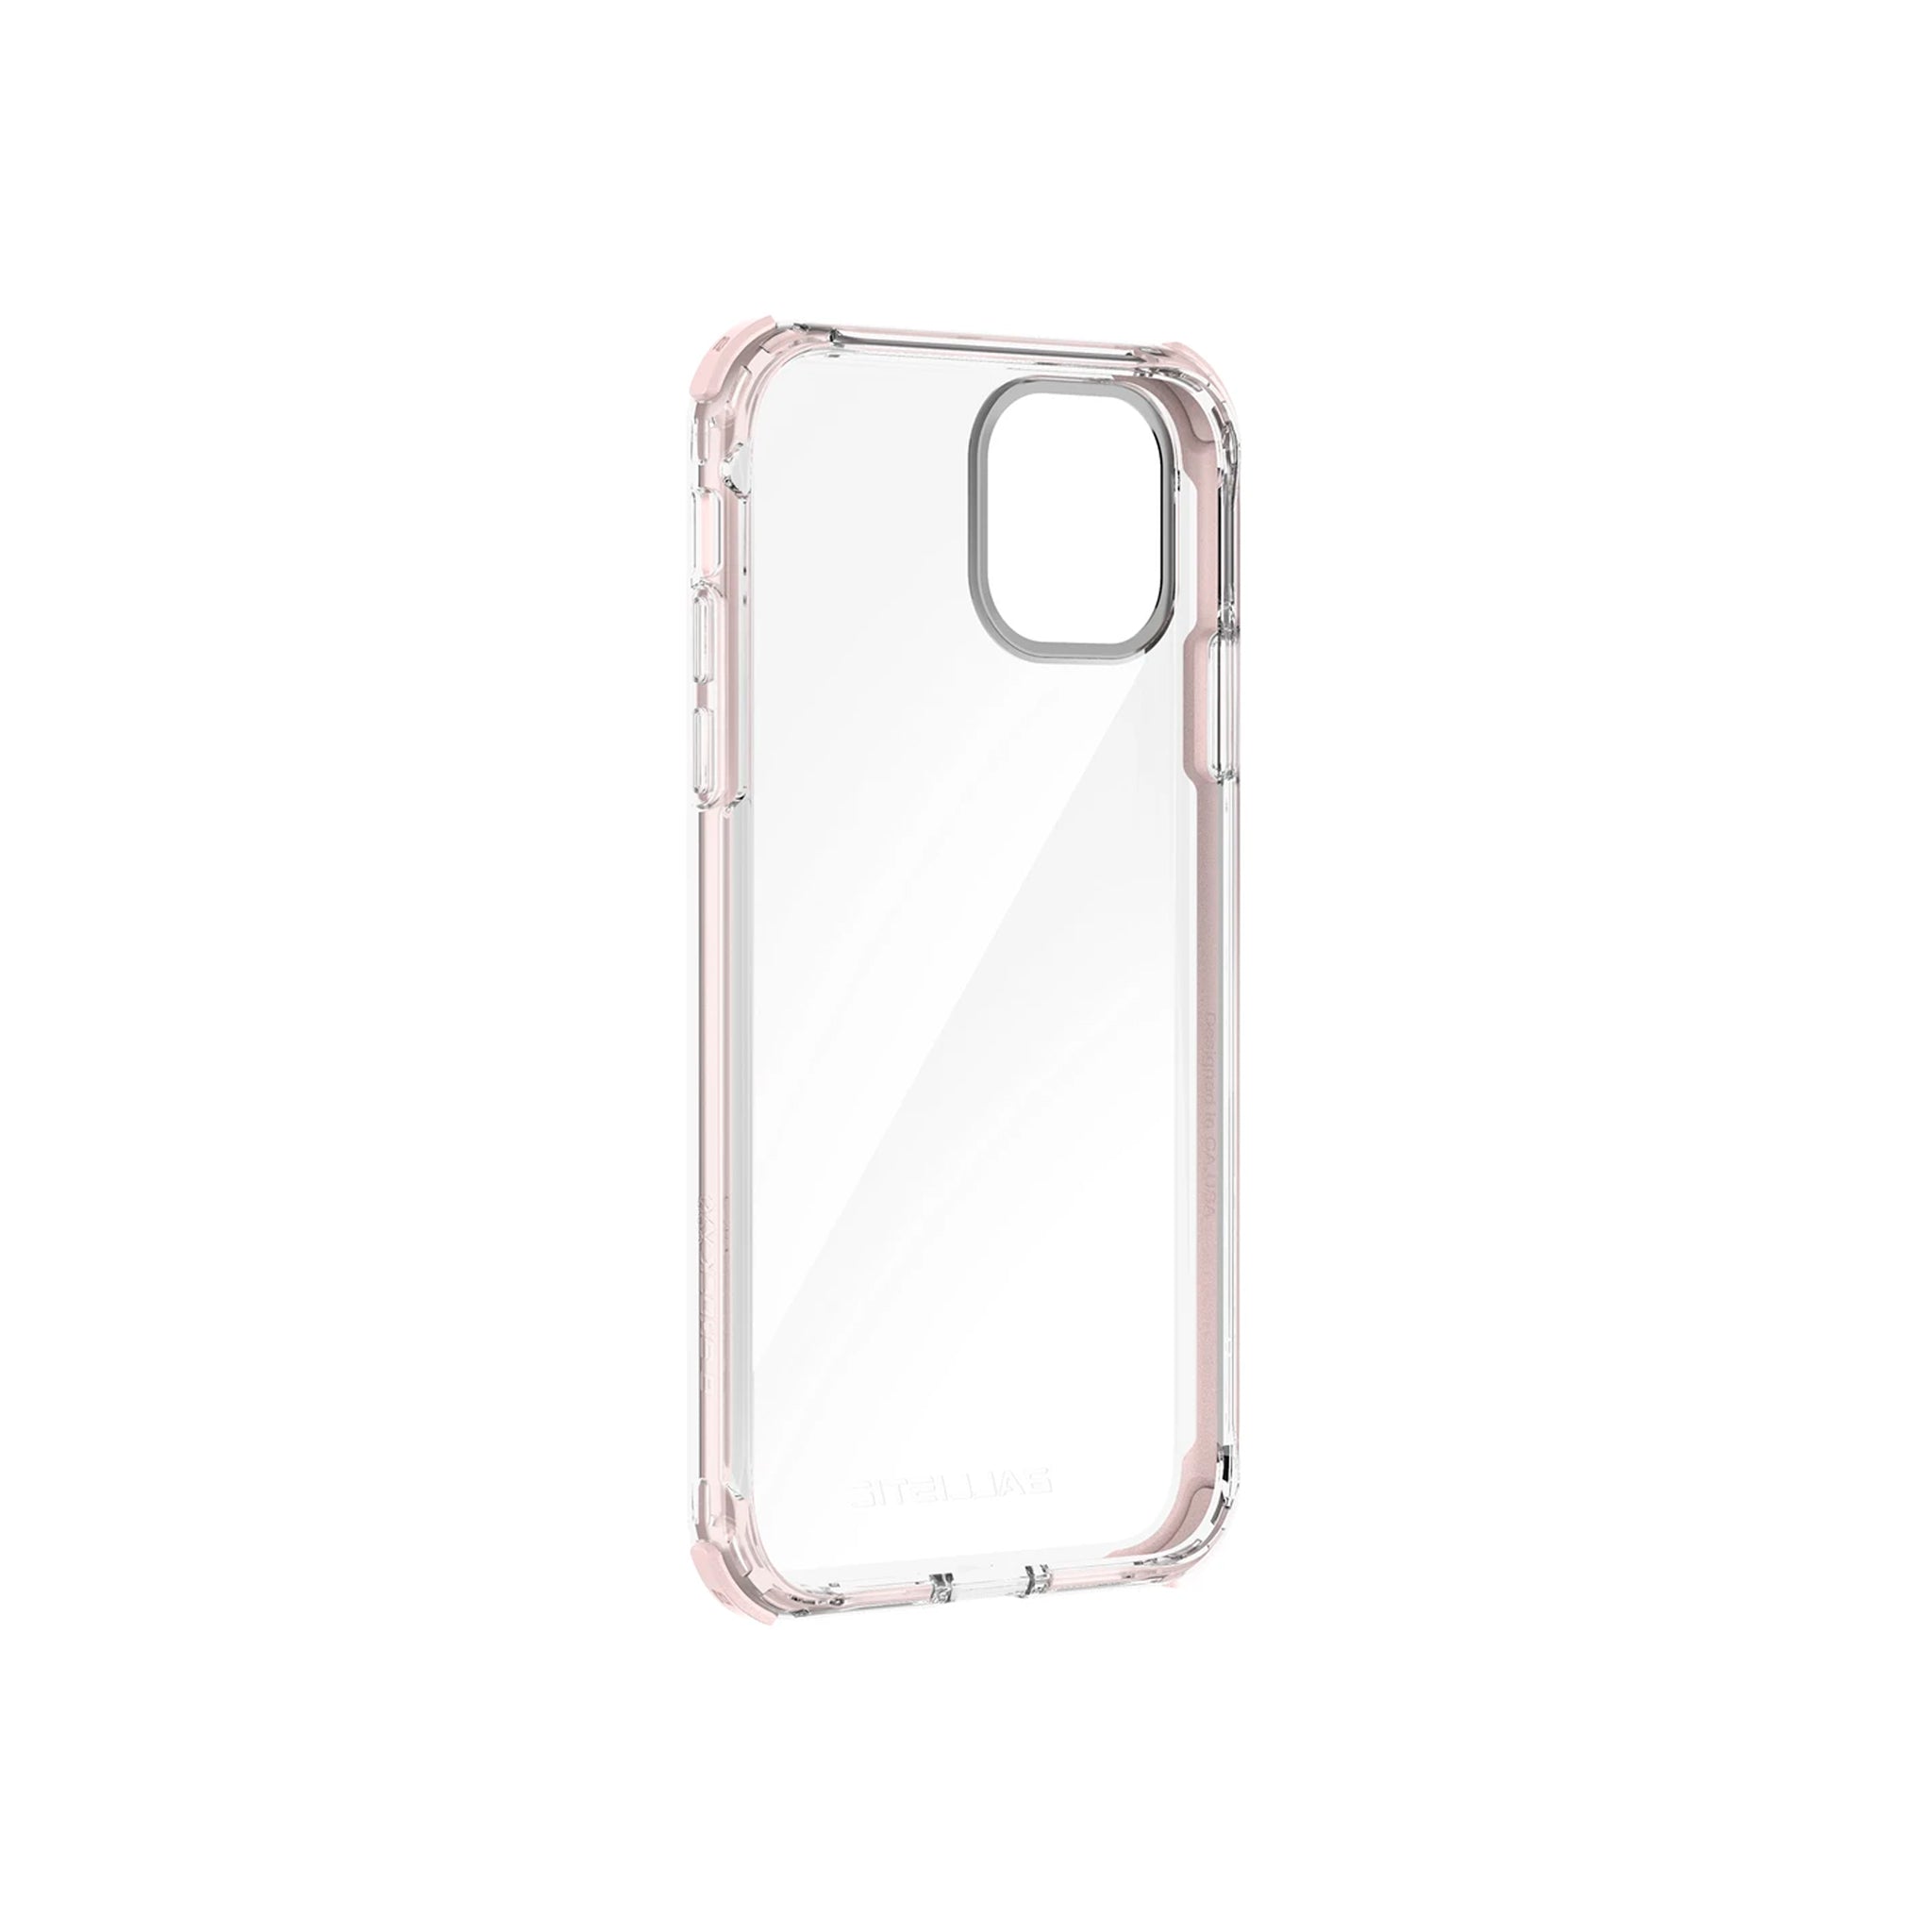 Ballistic - Bshock X90 Series For iPhone 11 Pro  Max - Pink